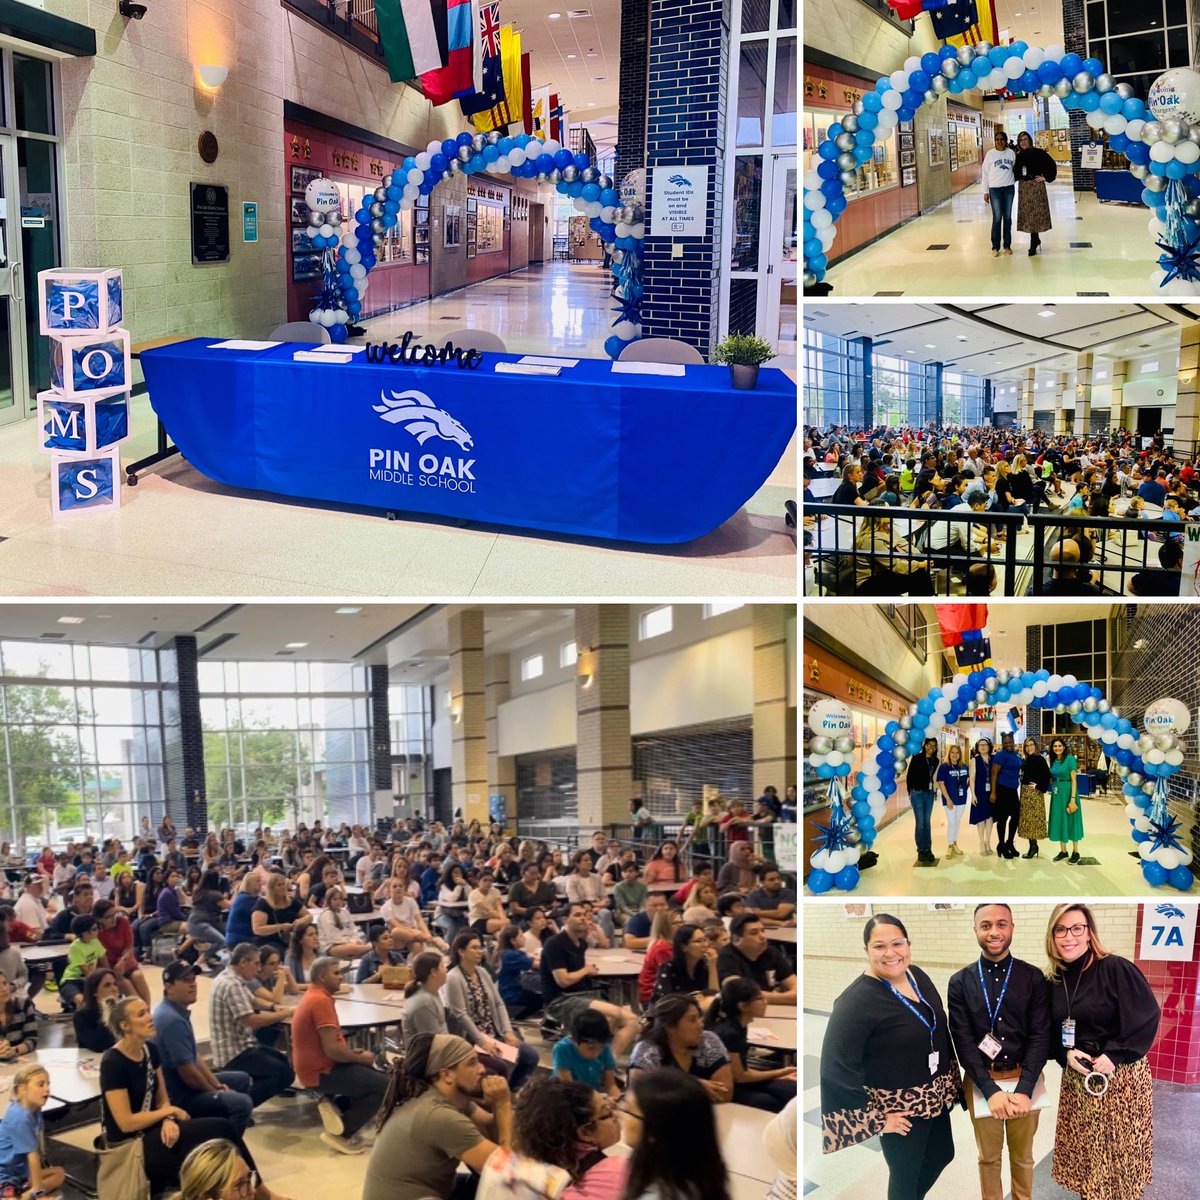 🎉Welcome to Pin Oak Middle School ~ Premier Foreign Language Magnet 🇨🇳 🇮🇹 🇩🇪 🇪🇸 🇫🇷 Class of 2026! #WeArePinOak #20YearsStrong #ChargerNation #ImagineBelieveAchieve